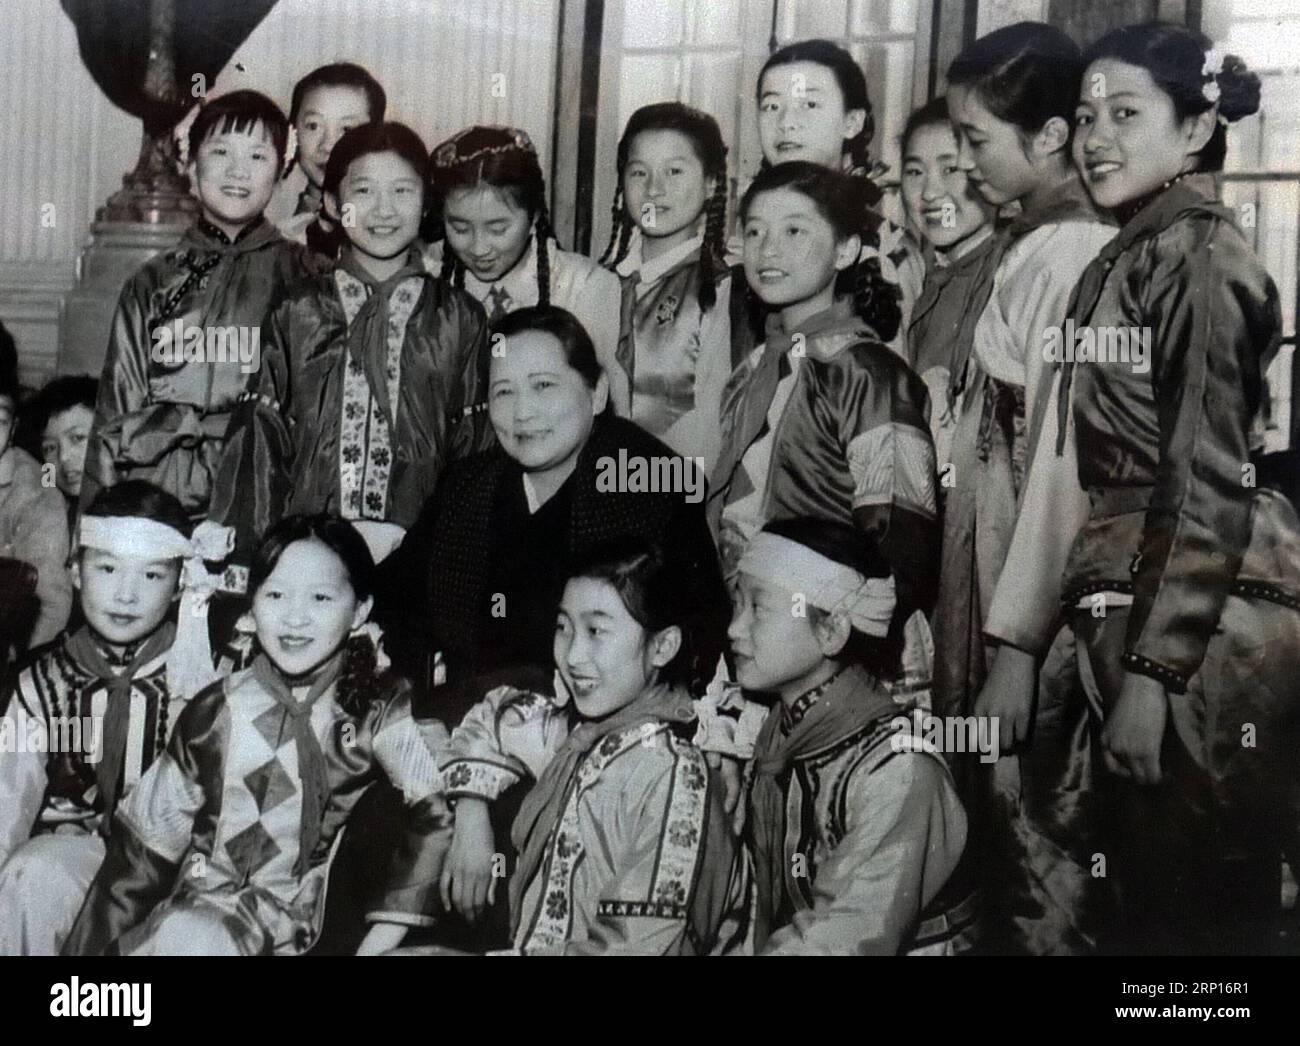 (180613) -- SHANGHAI, June 13, 2018 () -- File photo taken in Jan. 1960 shows Soong Ching Ling posing with kids at the Children s Palace under the China Welfare Institute (CWI) during the Chinese Spring Festival in Shanghai, east China. This year marks the 80th anniversary of the CWI, founded by Soong Ching Ling in 1938. The Shanghai-based organization focuses on maternal and child health, education and social welfare. Soong Ching Ling, born in Shanghai in 1893, was the wife of Chinese revolutionary Dr. Sun Yat-sen, who led the 1911 Revolution. (/CWI) (wyl) CHINA-SHANGHAI-CWI-SOONG CHING LING- Stock Photo